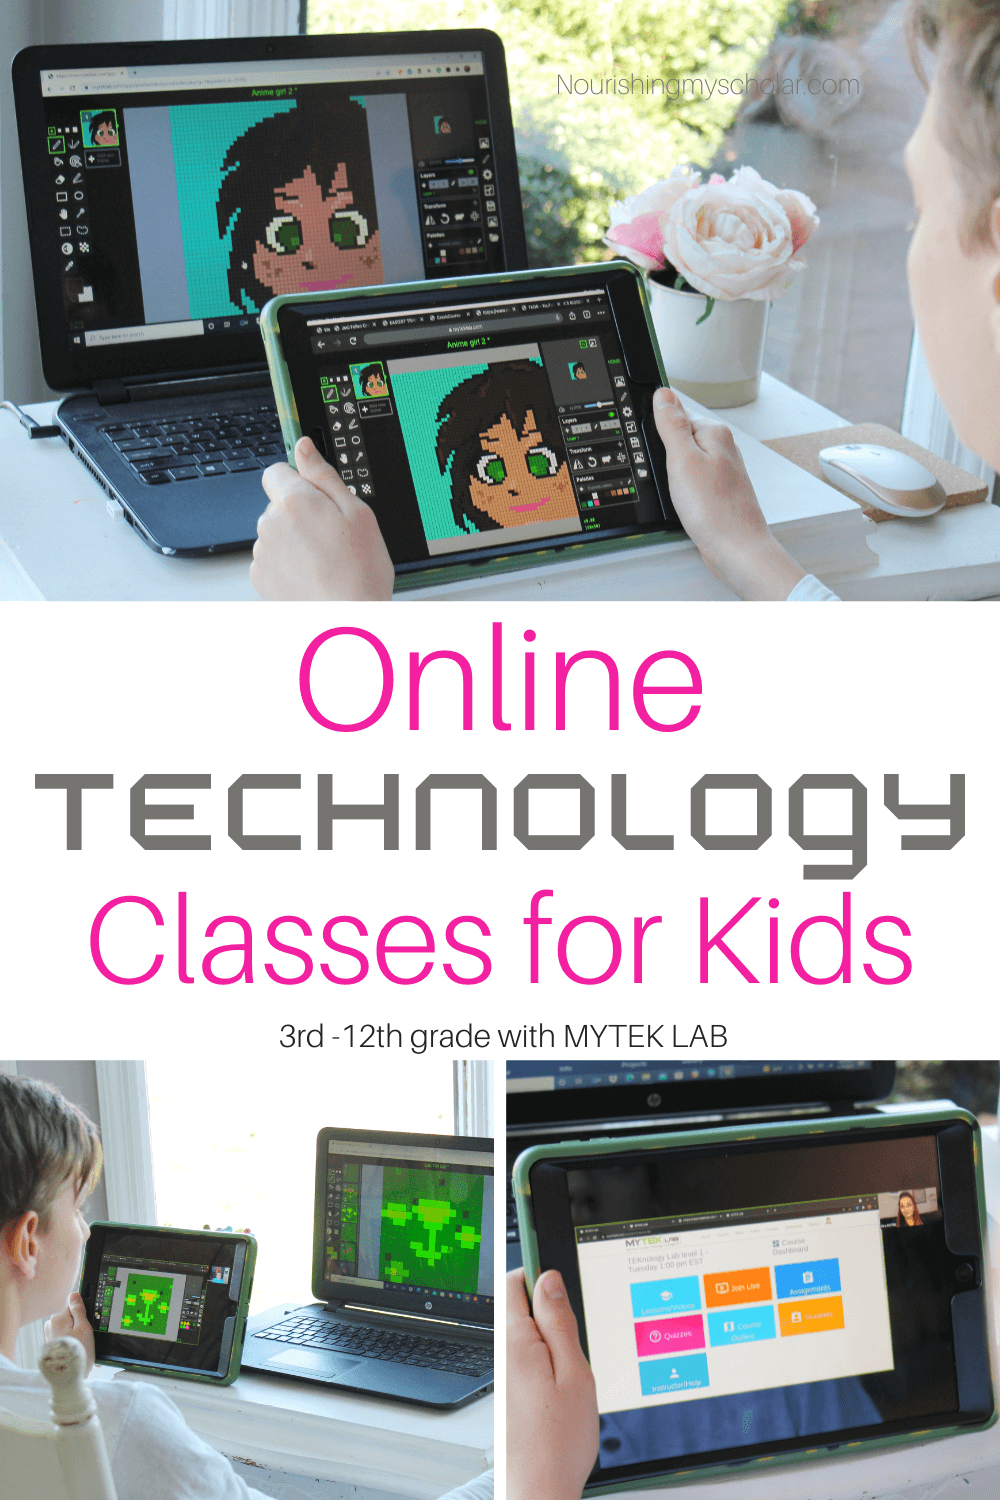 Online Technology Classes for Kids: With these online technology classes, your kids can learn computer pixel art, coding, programming, robotics, modeling, and computer fundamentals in live classes! #technologyforkids #onlinetechnologyforkids #MYTEKLAB #onlinetechnologyclasses